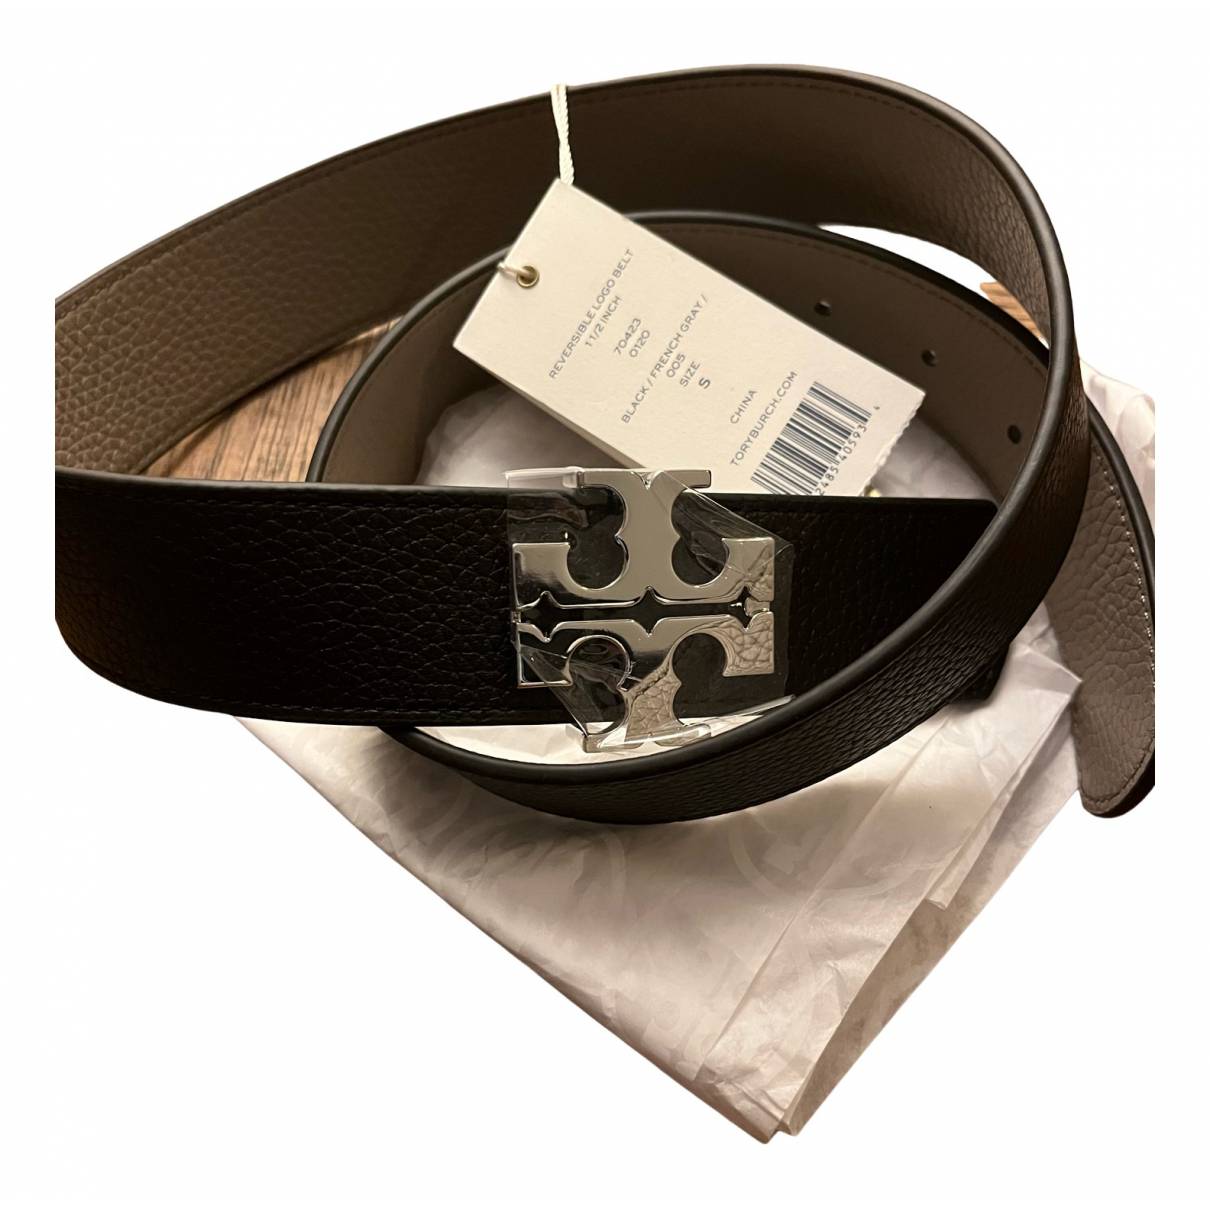 Leather belt Tory Burch Black size S International in Leather - 21025964